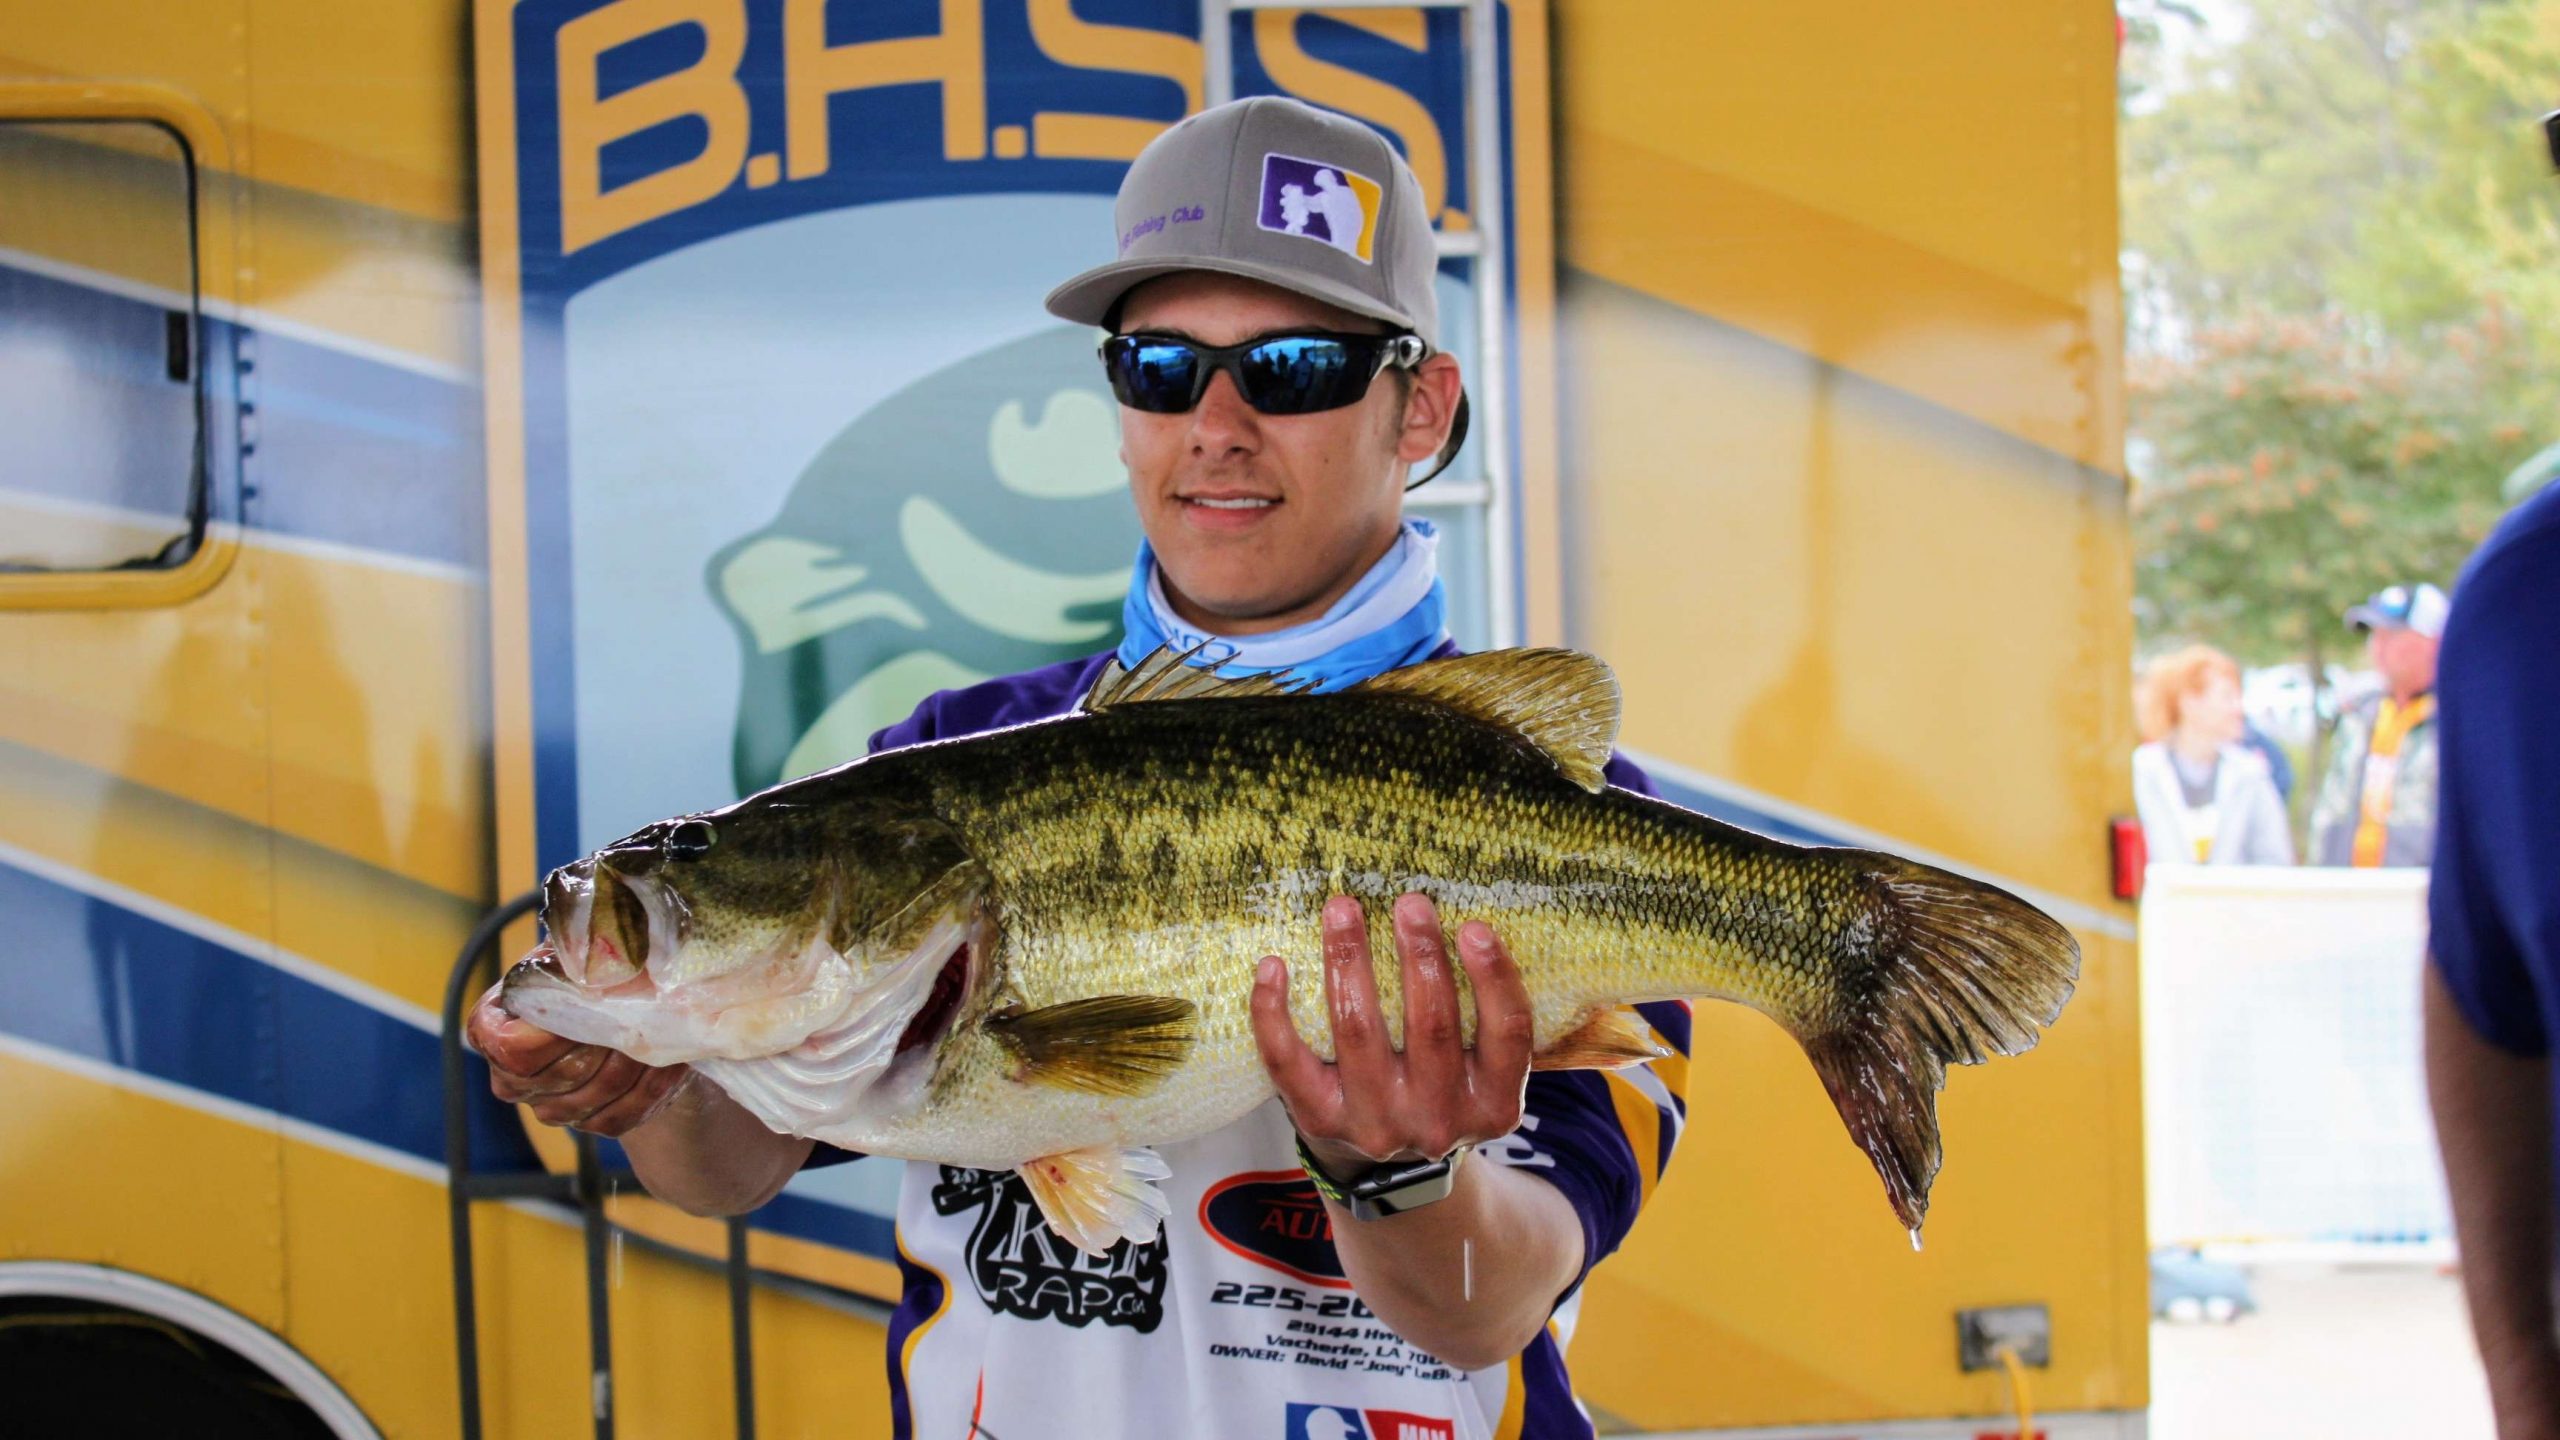 Hunter Martin of Lutcher (La.) High School caught the big bass of
  the Costa Bassmaster High School Cenral Open presented by Dick's
  Sporting Goods. Martin boated an 8-pound, 11-ounce bass which earned
  him and his teammate Justin Jacob a pair of Abu Garcia reels for the
  effort. It was the biggest fish brought in by the nearly 400 anglers
  competing in the open on Toledo Bend Reservoir, but it certainly
  wasn't the only one.
 
